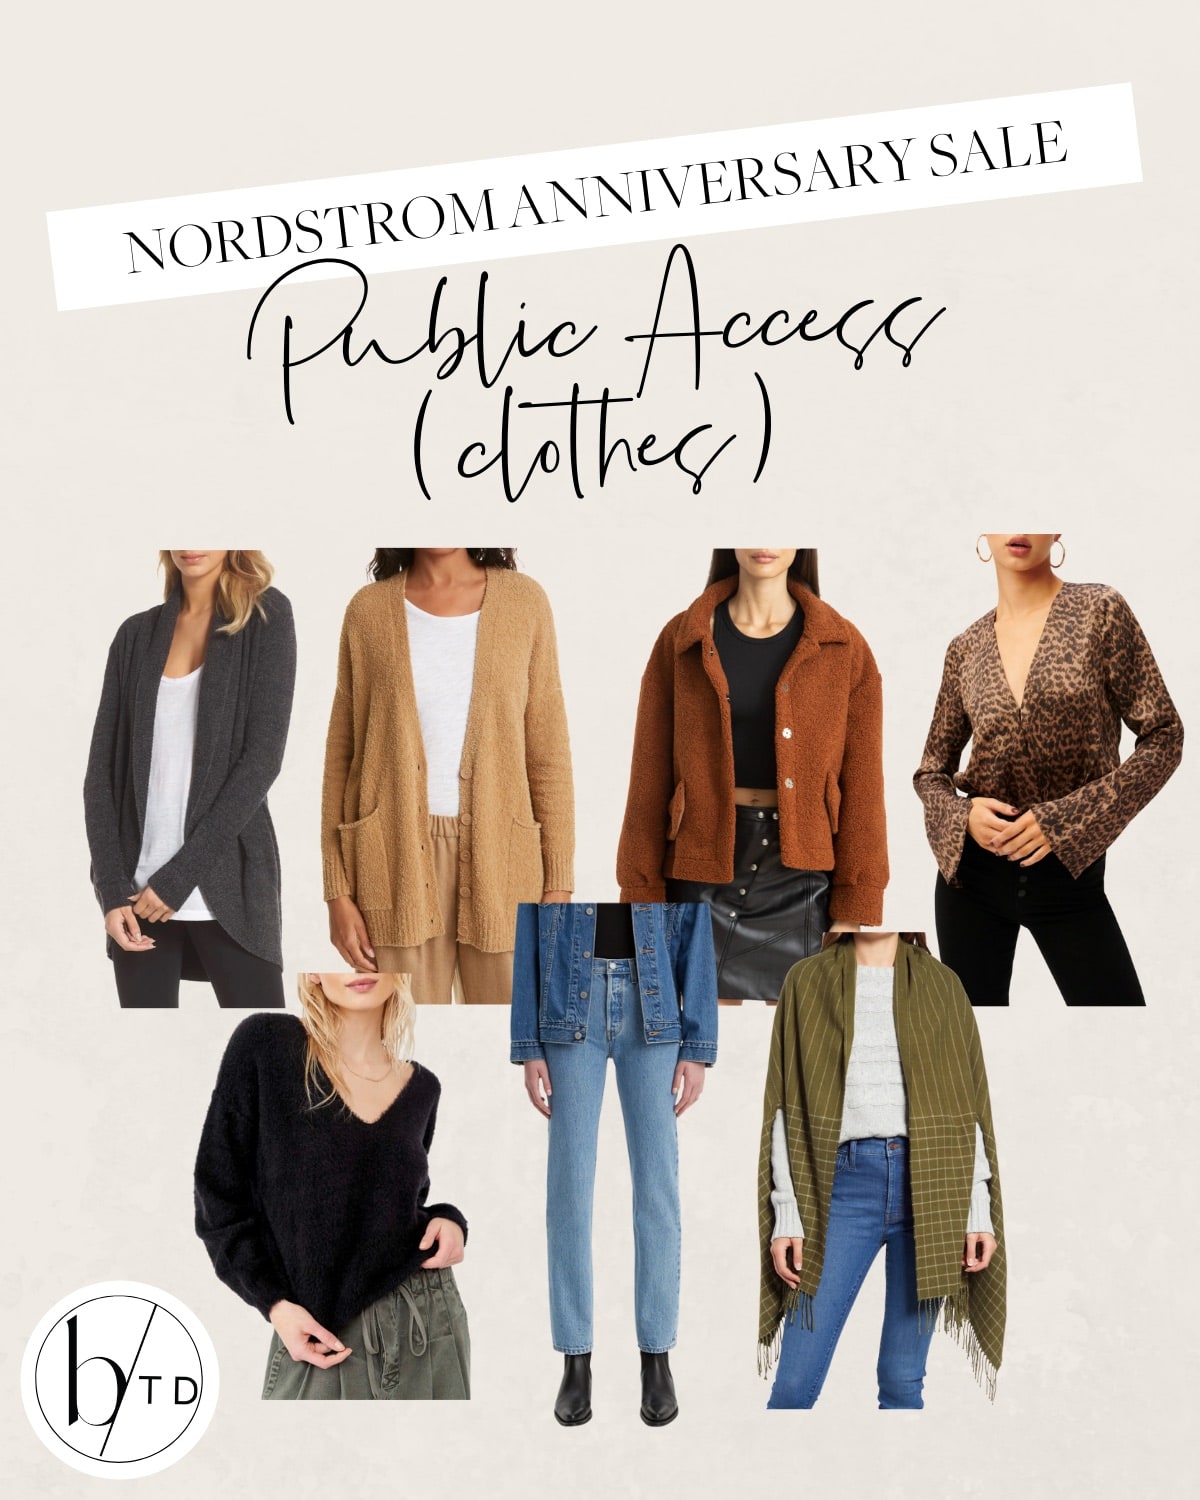 Nordstrom Anniversary Sale clothes